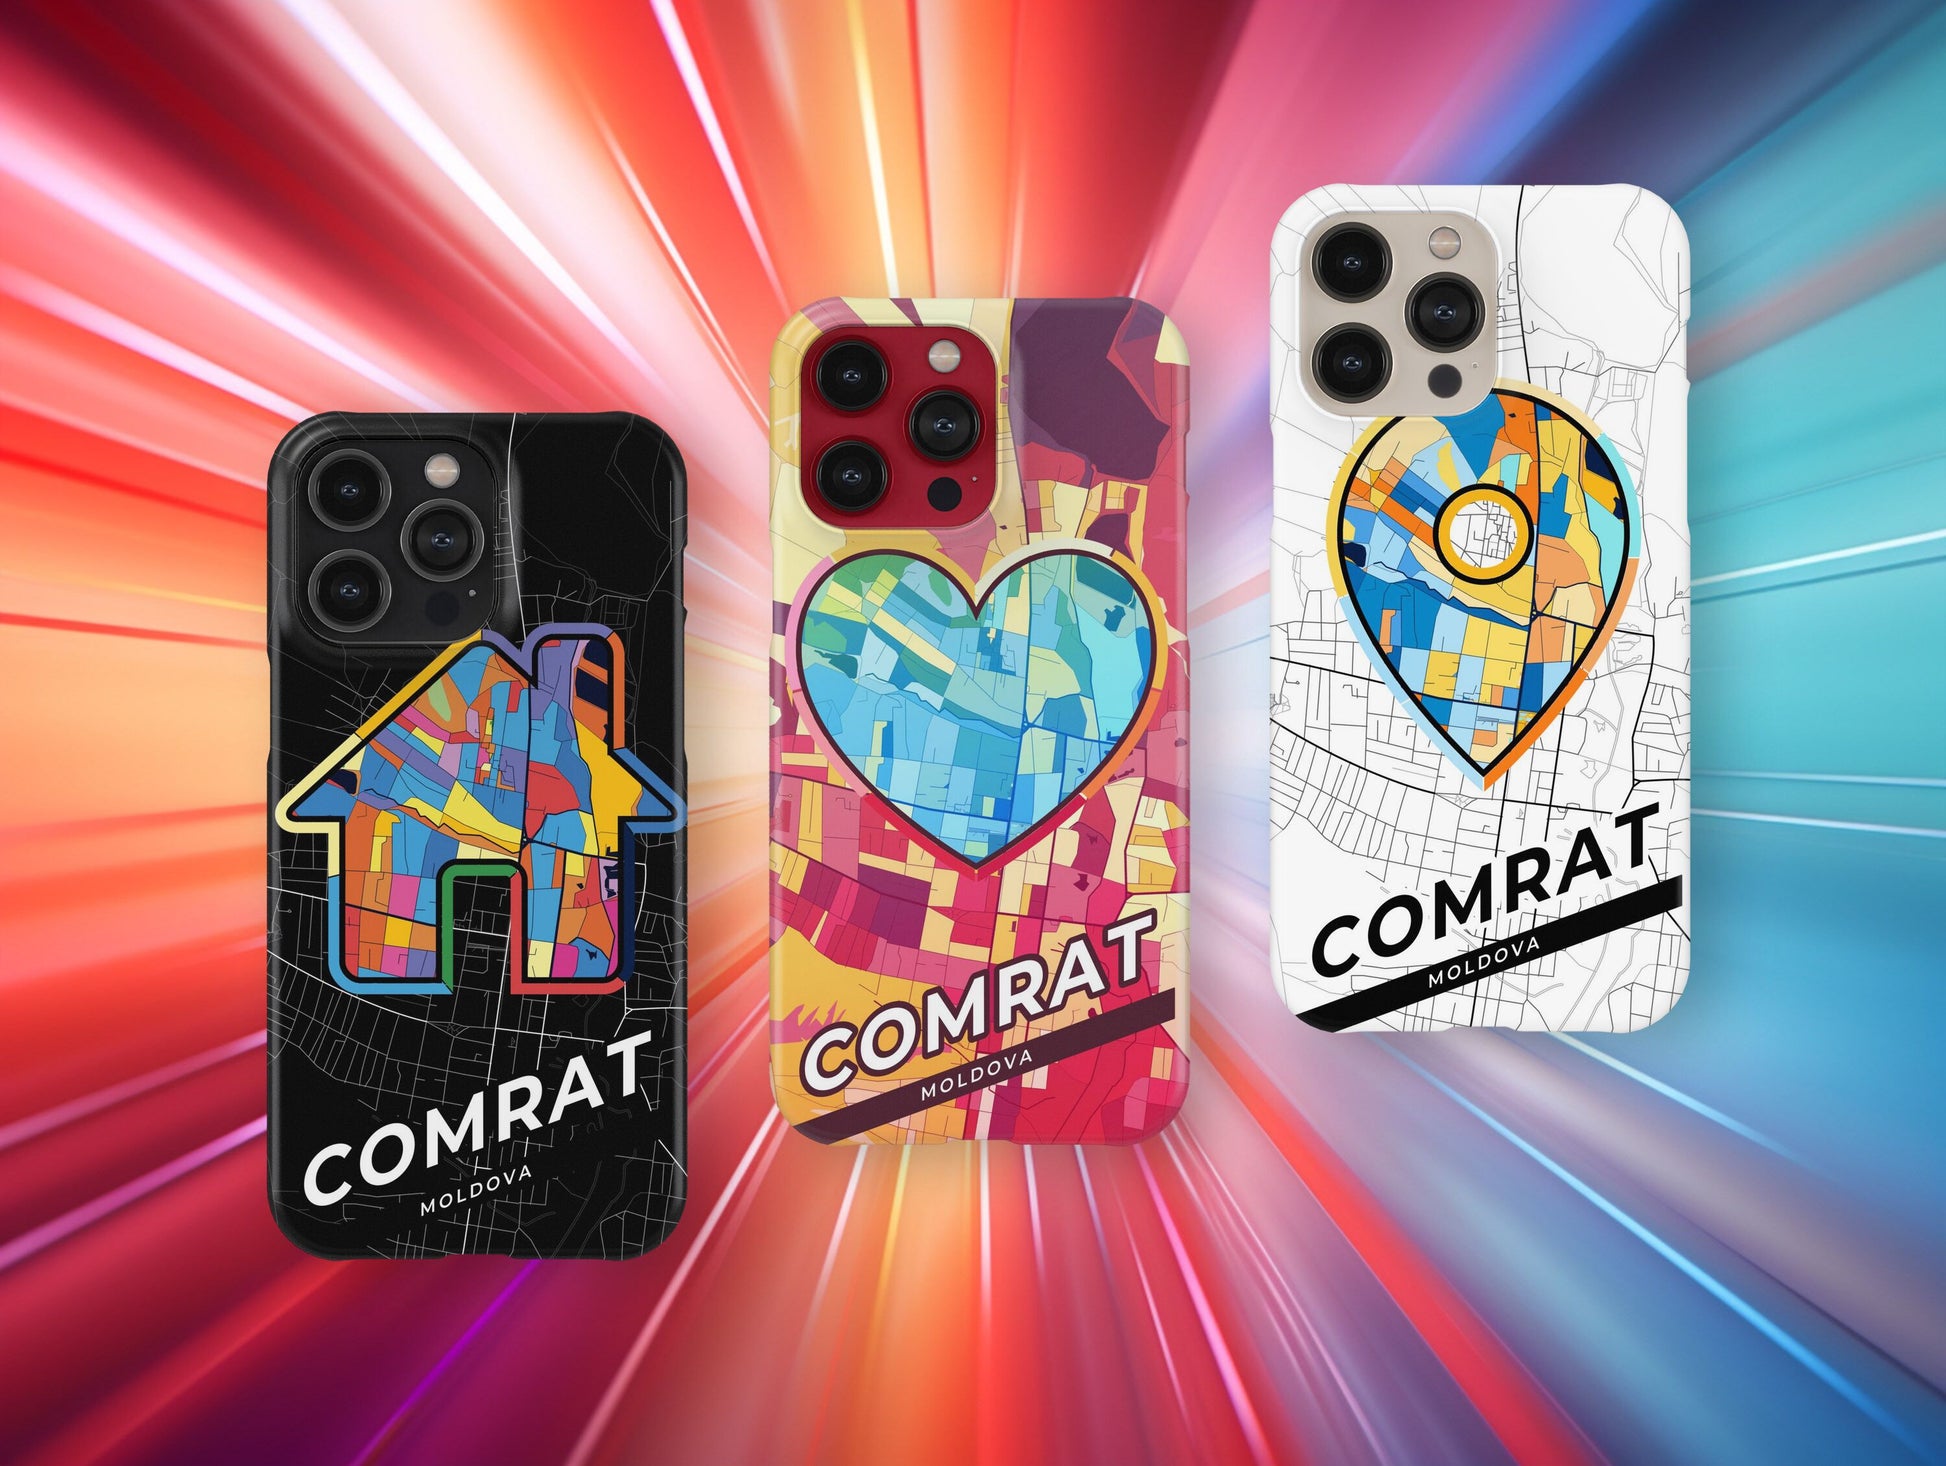 Comrat Moldova slim phone case with colorful icon. Birthday, wedding or housewarming gift. Couple match cases.